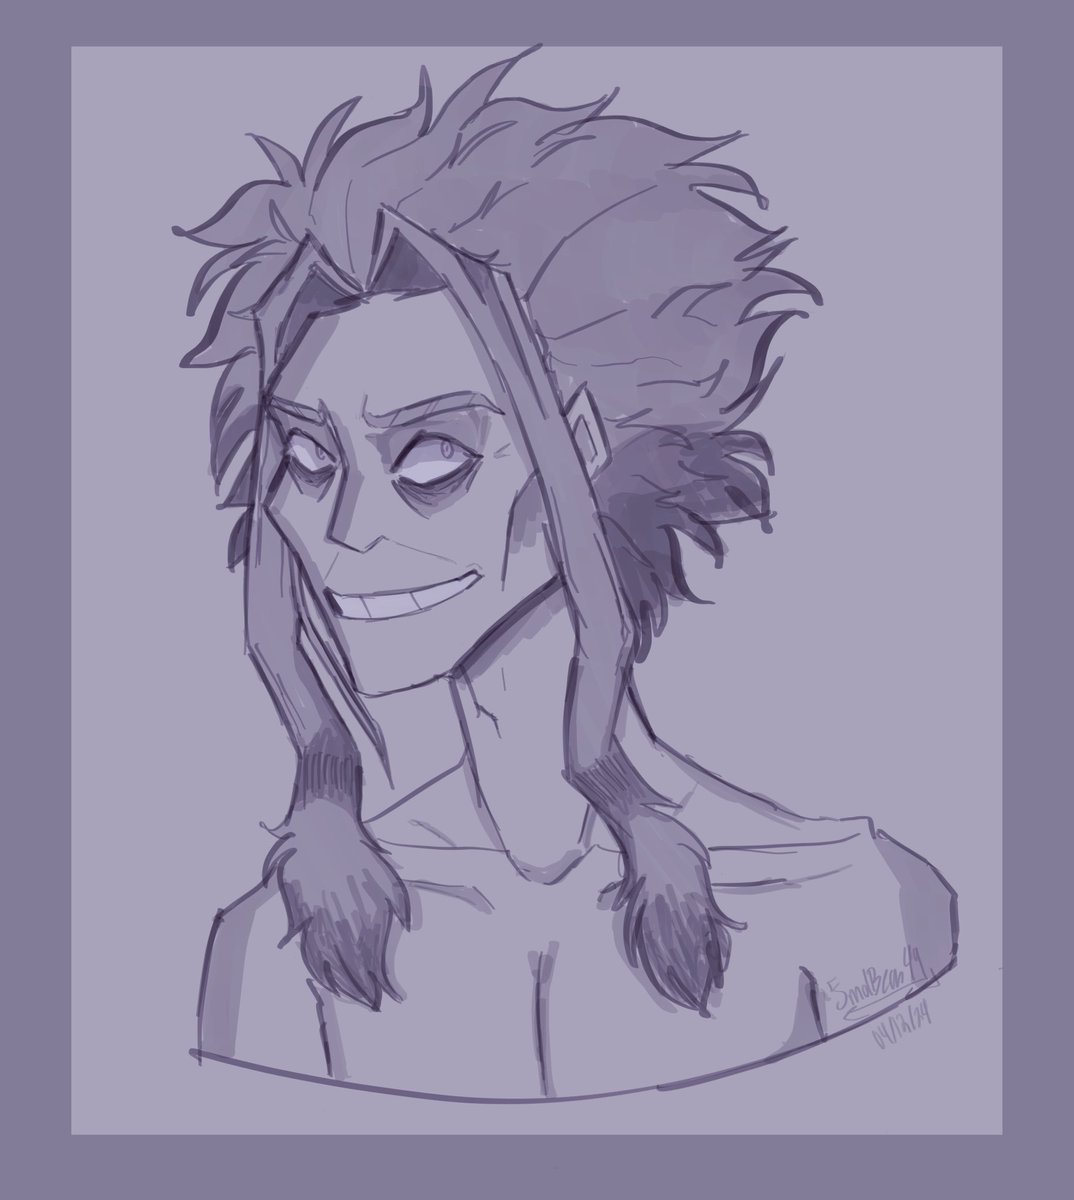 Trying to figure out how to draw him in my style.

#ToshinoriYagi #AllMight #MyHeroAcademia #MHA